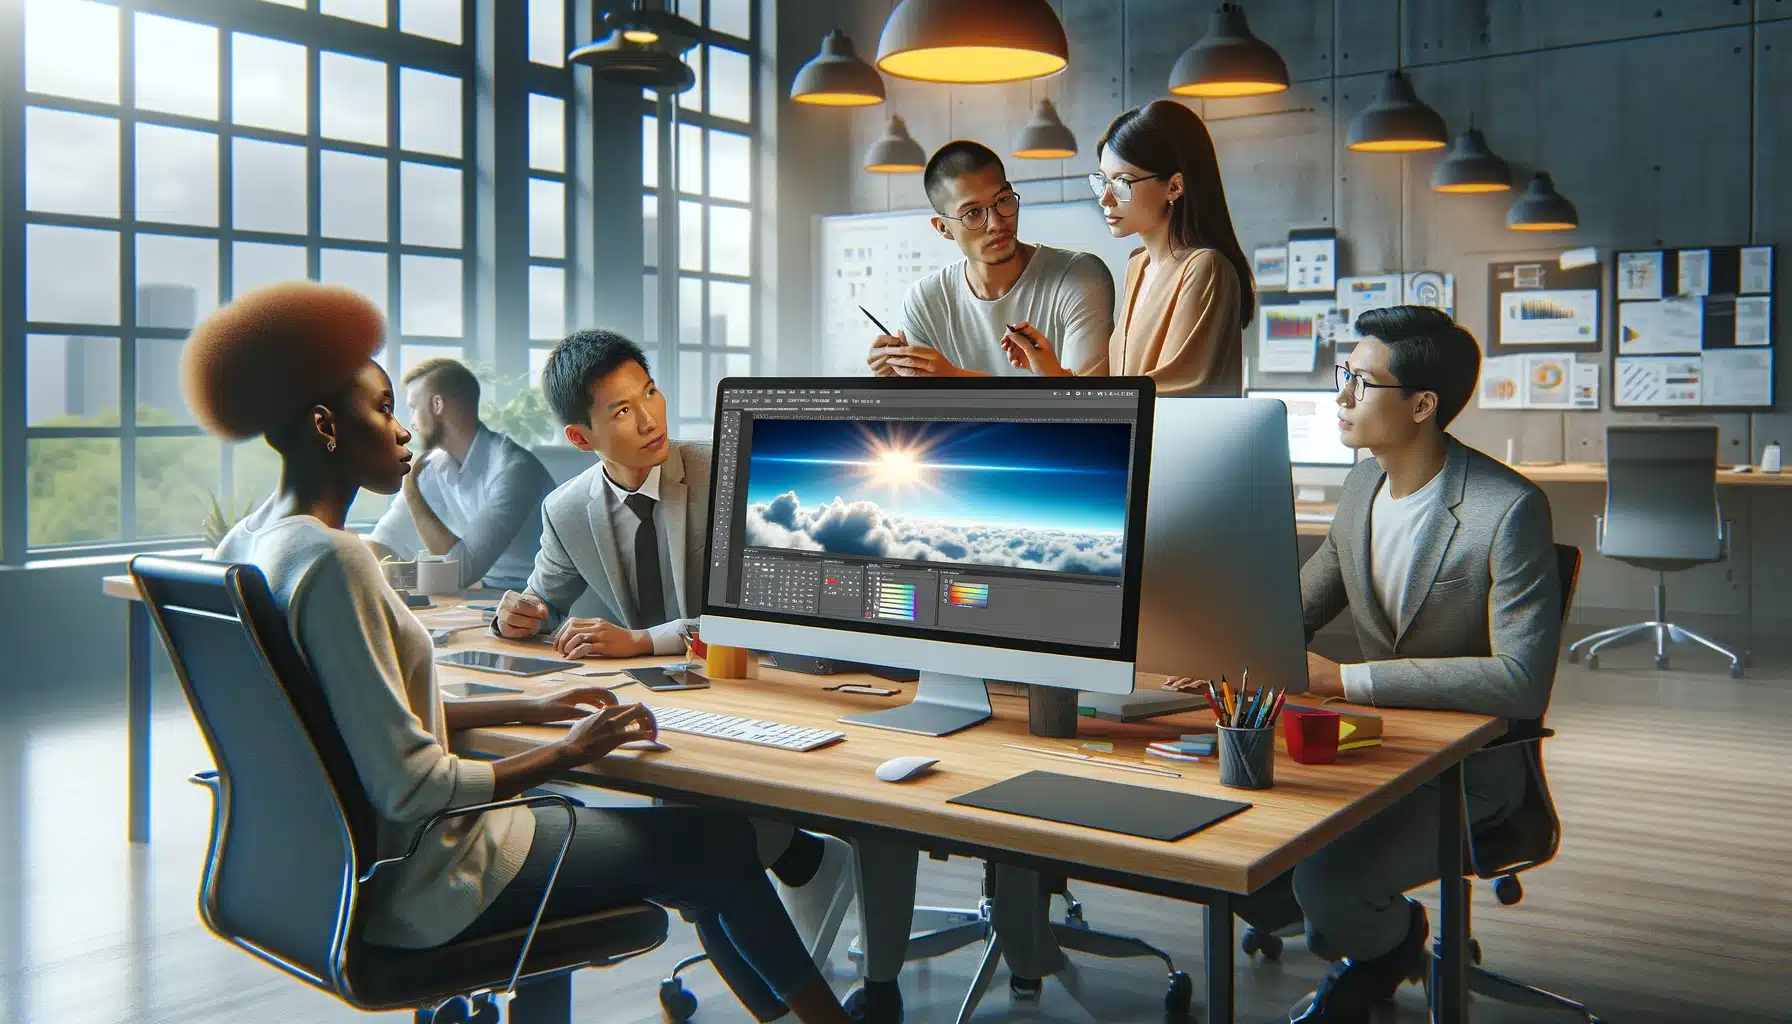 Several diverse professionals discuss empyrean reinstatement techniques around a desktop displaying image editing software in a modern office setting.